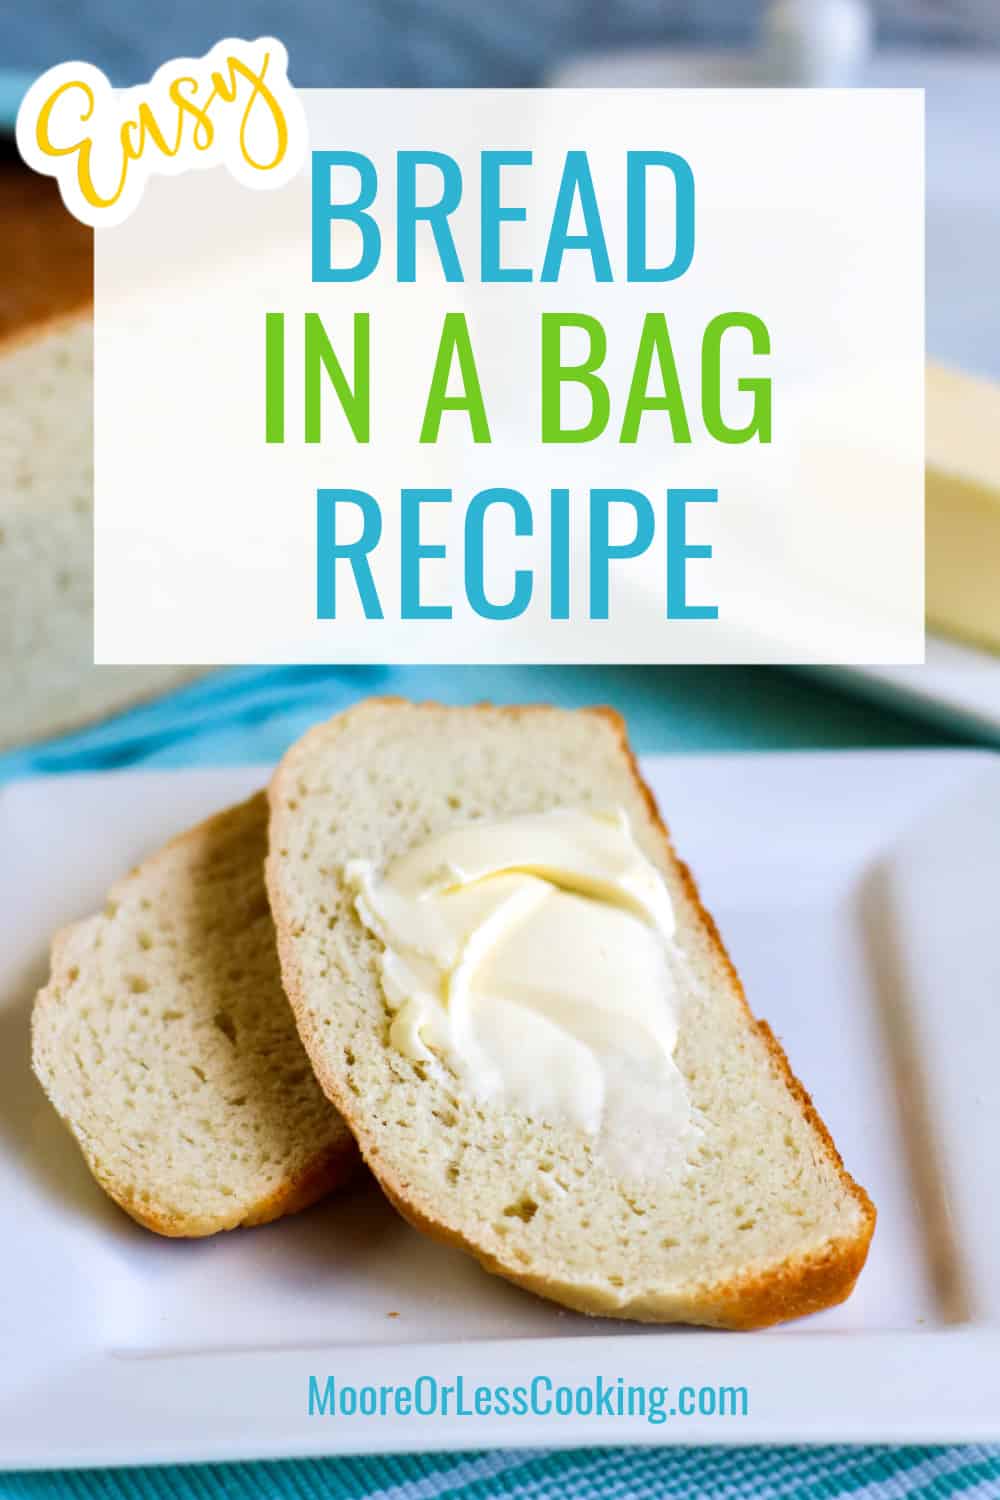 Bread In A Bag-Homemade bread is made easy with this recipe that starts in a Ziploc bag and finishes as a fragrant, warm, and golden loaf in the oven. It's a mess-free way to make bread that turns out deliciously perfect every time! via @Mooreorlesscook